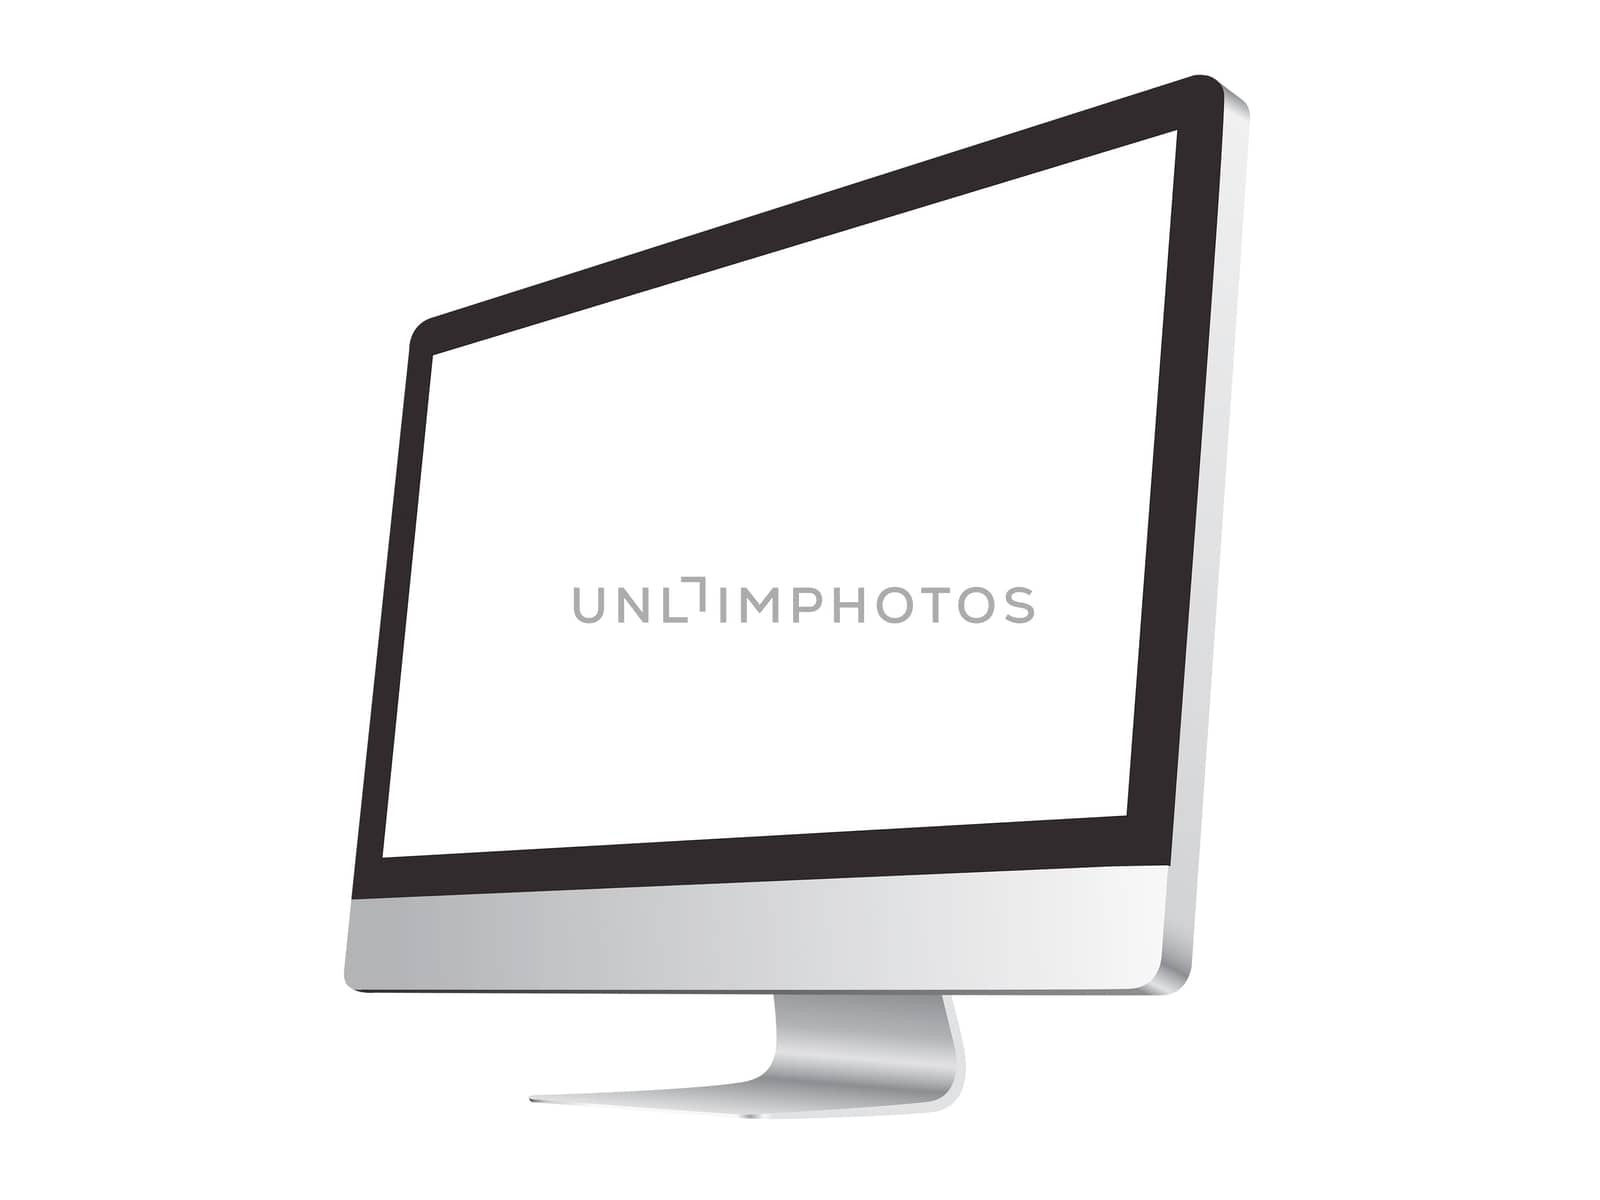 iMac Computer on white background mockup by cougarsan